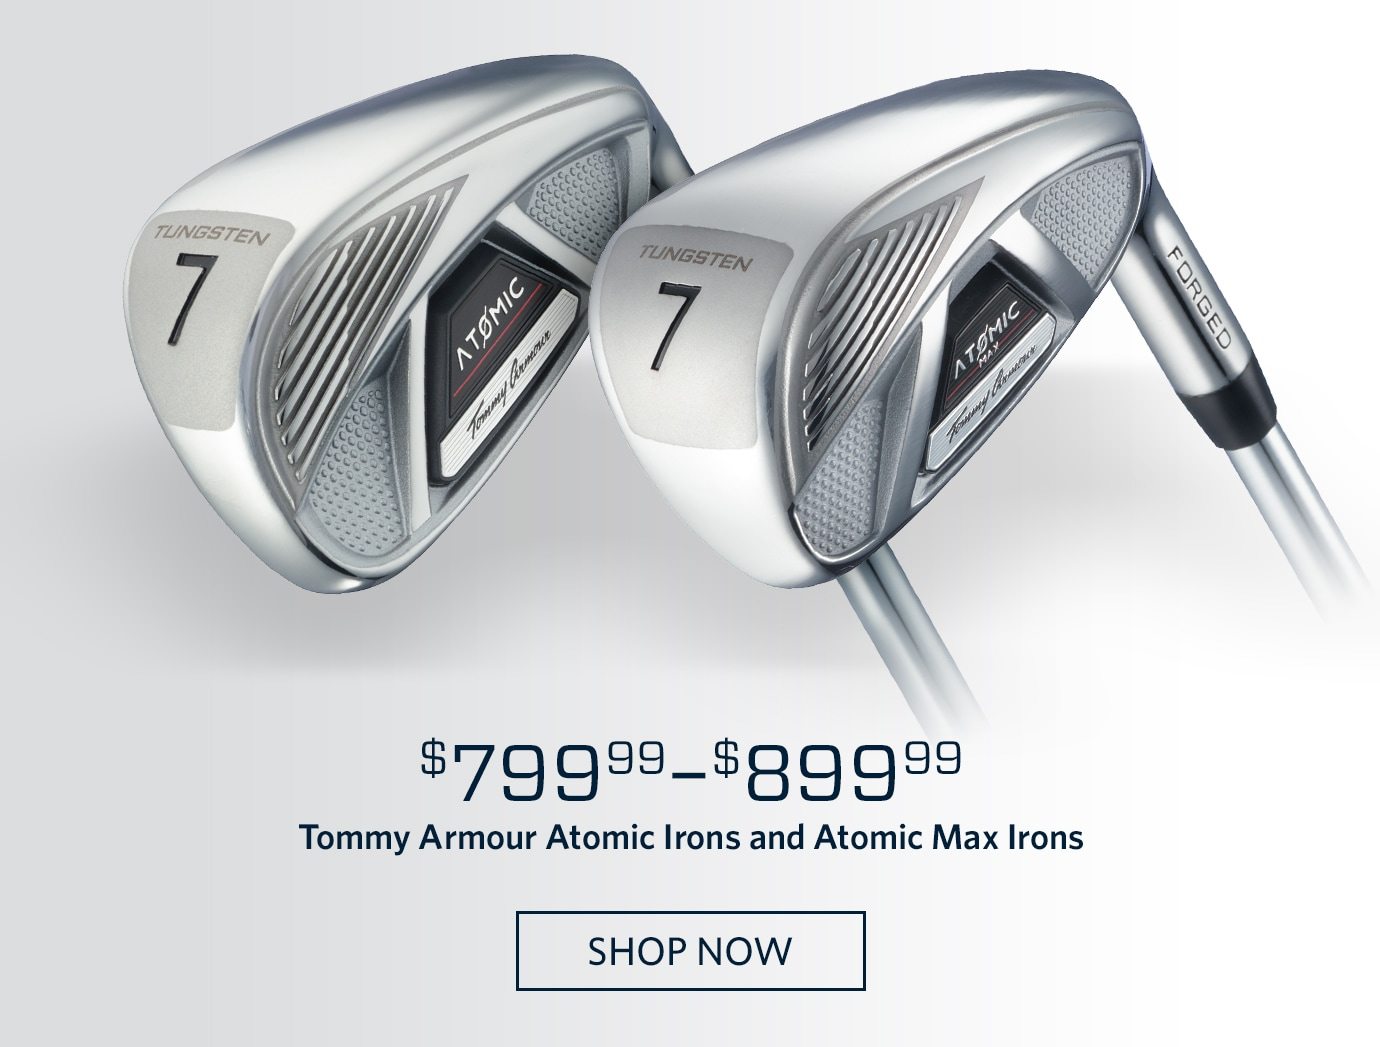 $799.99-$899.99 Tommy Armour Atomic Irons and Atomic Max Irons | SHOP NOW